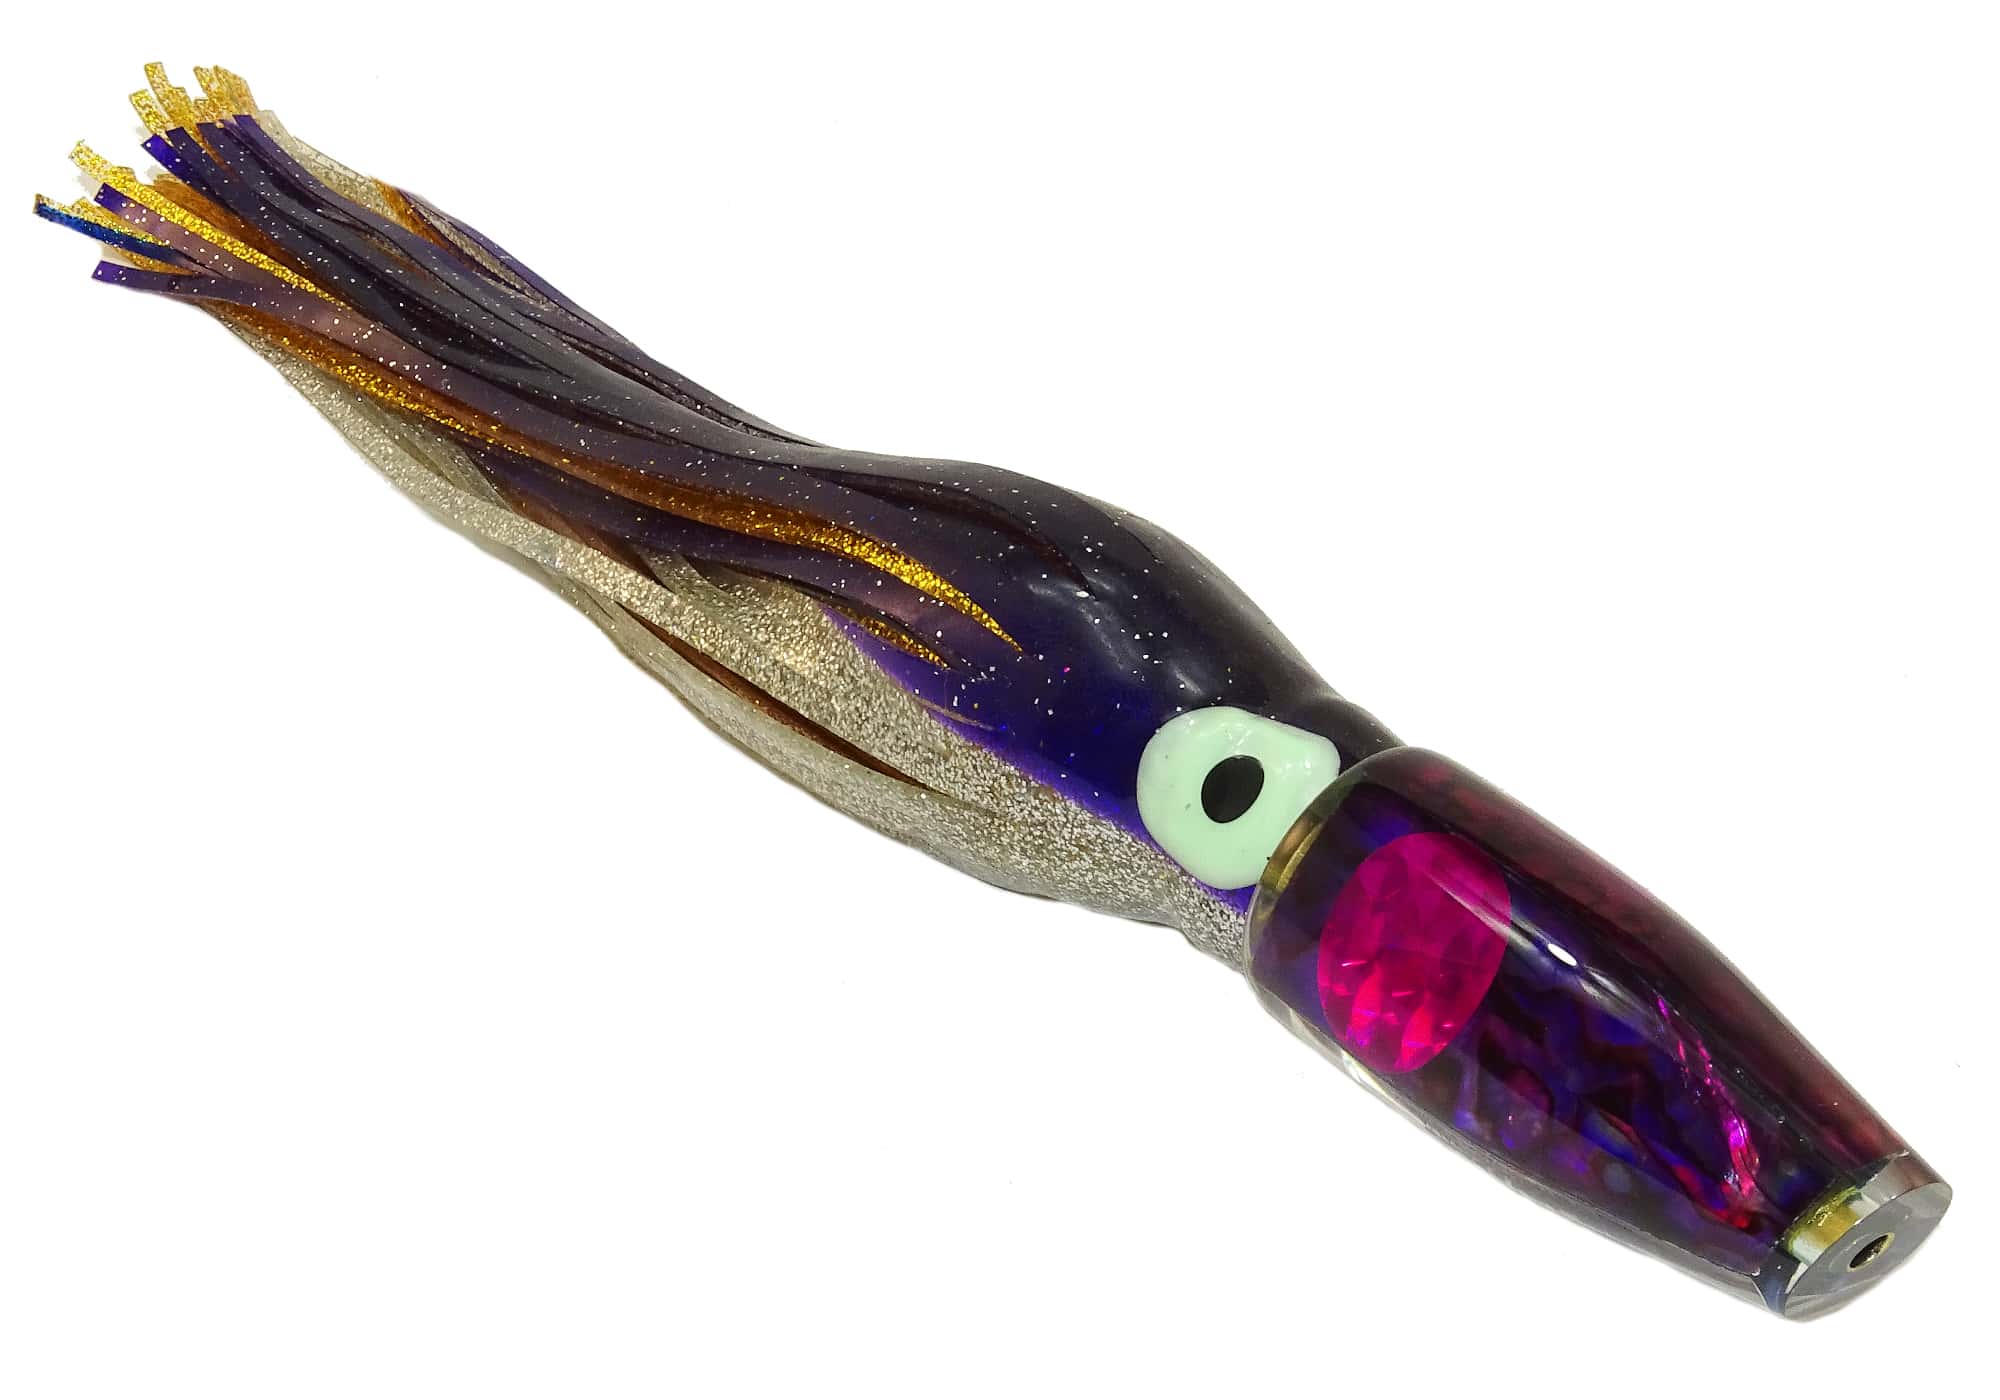 Best lures for Tuna - JB Lures Pluto